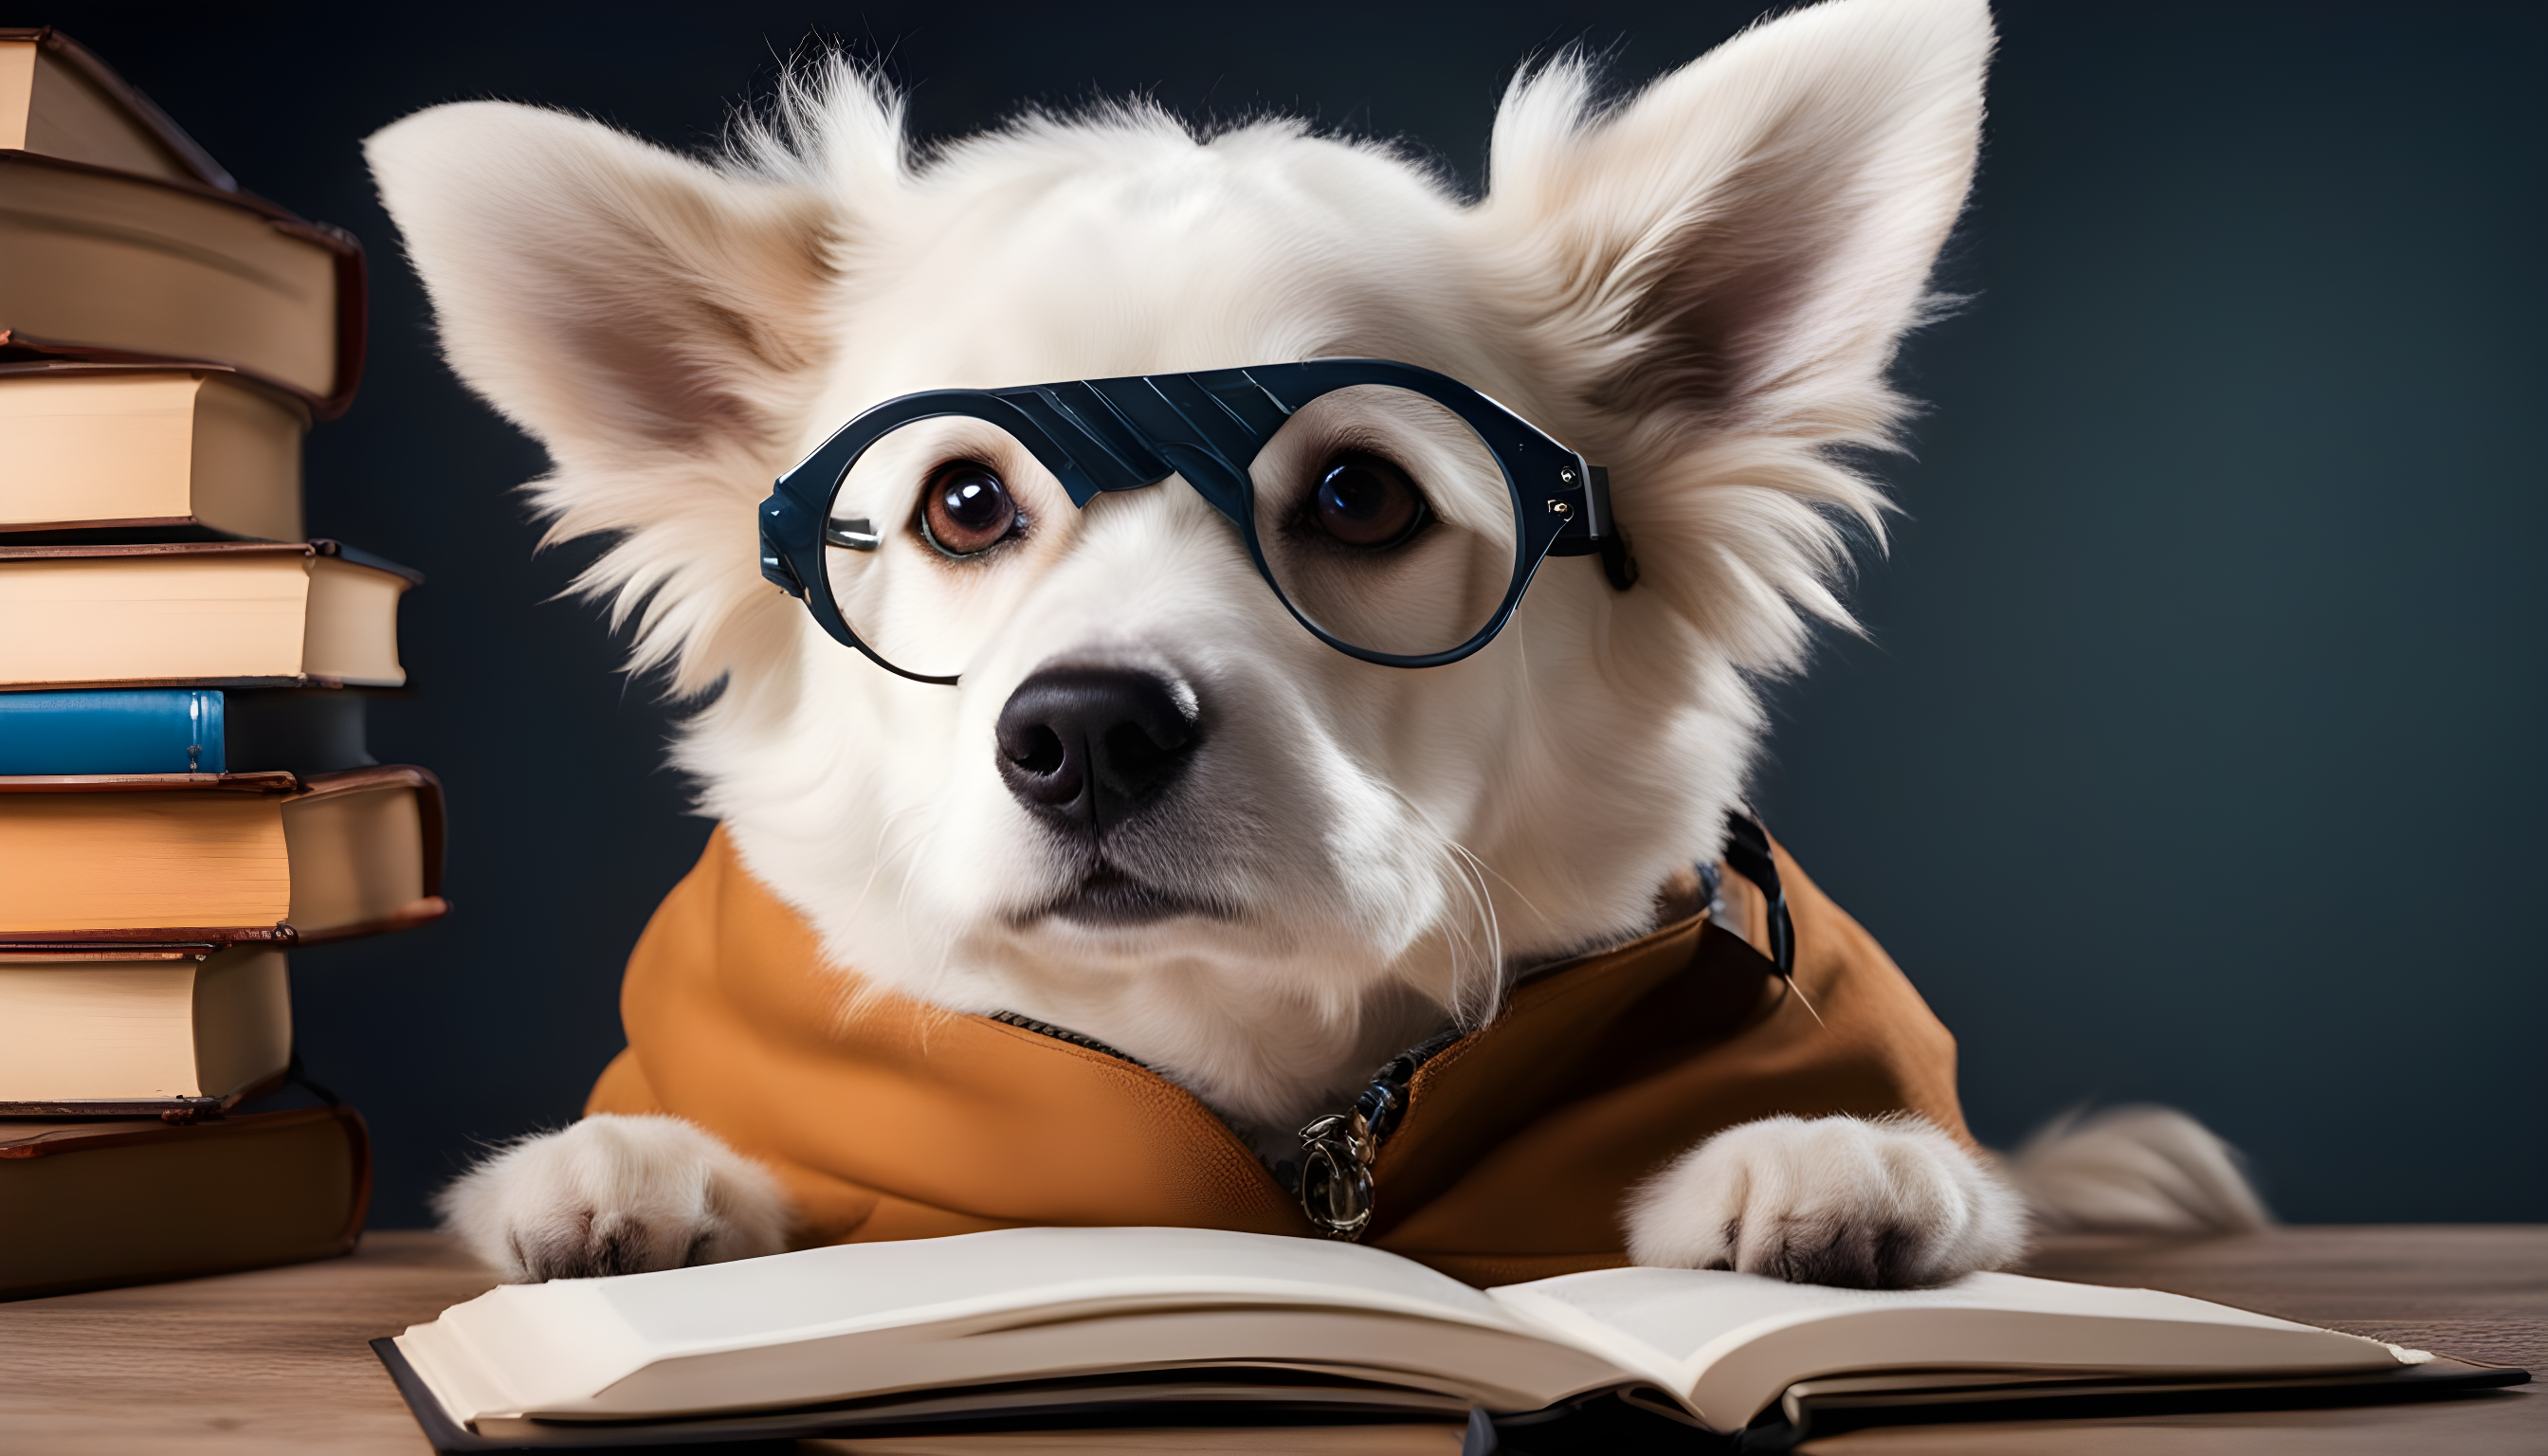 "Sheprador looking like the doggy Einstein, complete with reading glasses and a book."